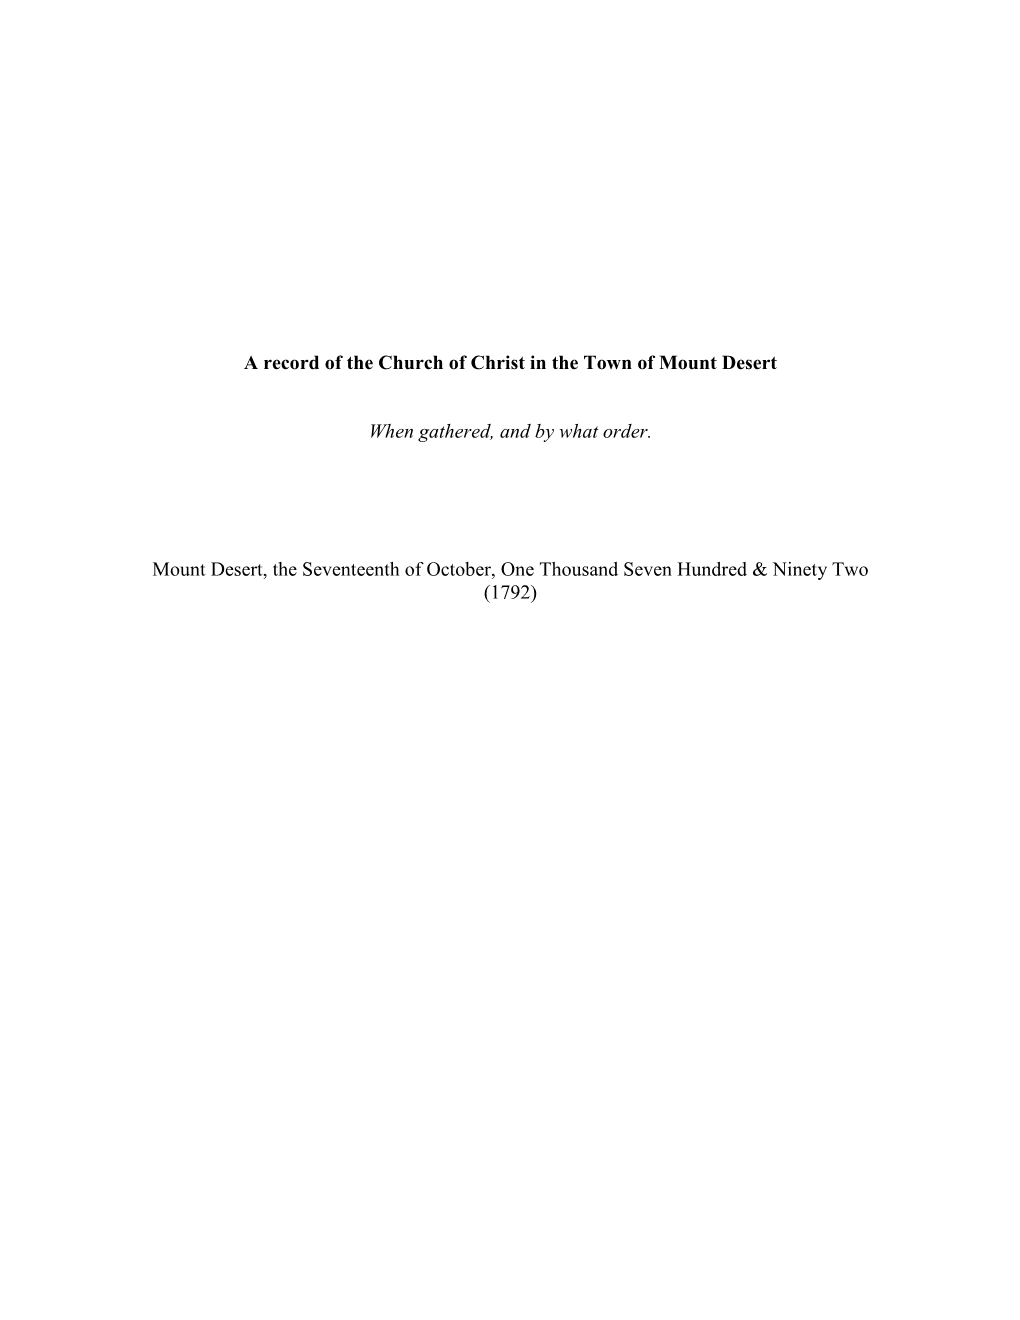 A Record of the Church of Christ in the Town of Mount Desert